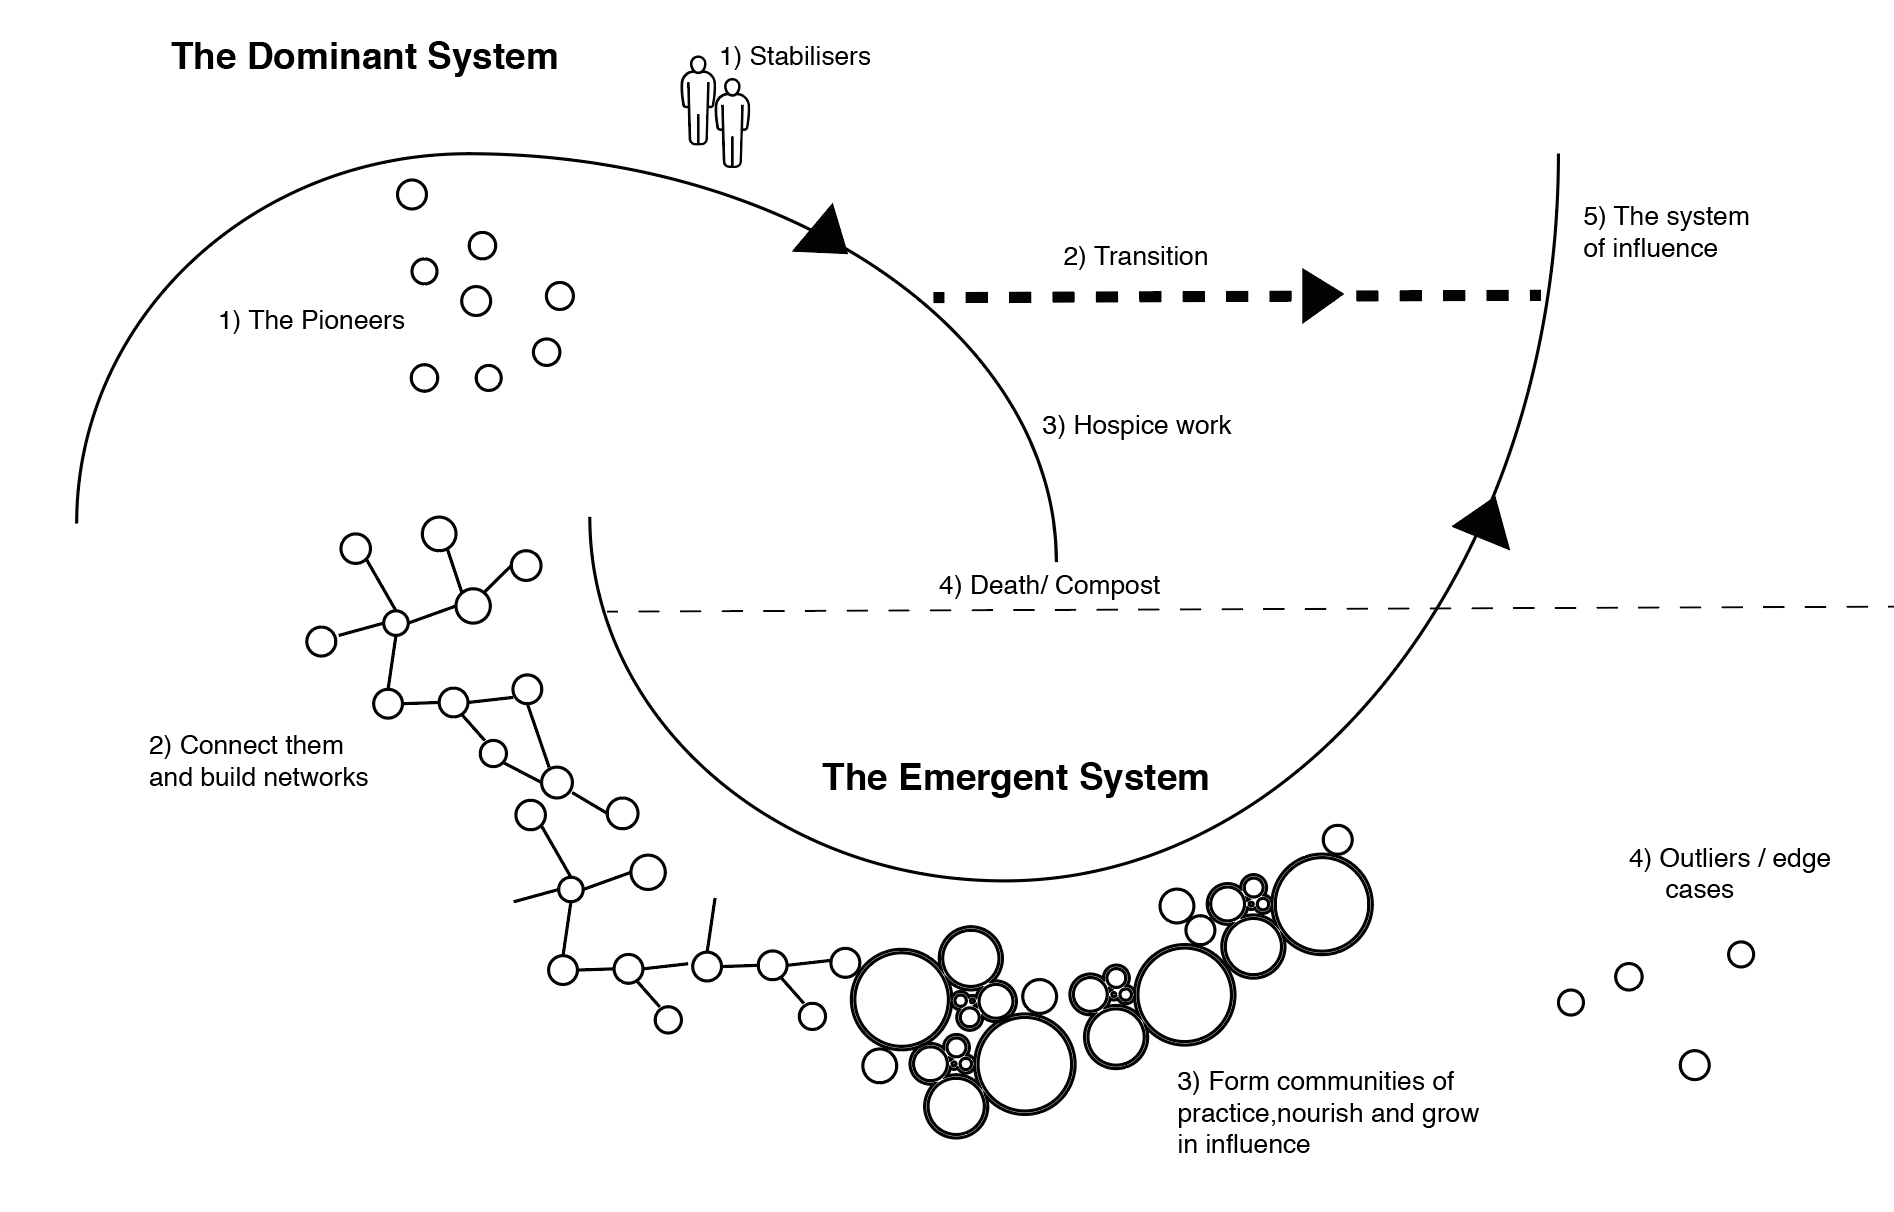 The Berkana Institute's Two Loop model showing the Dominant System and the Emergent System